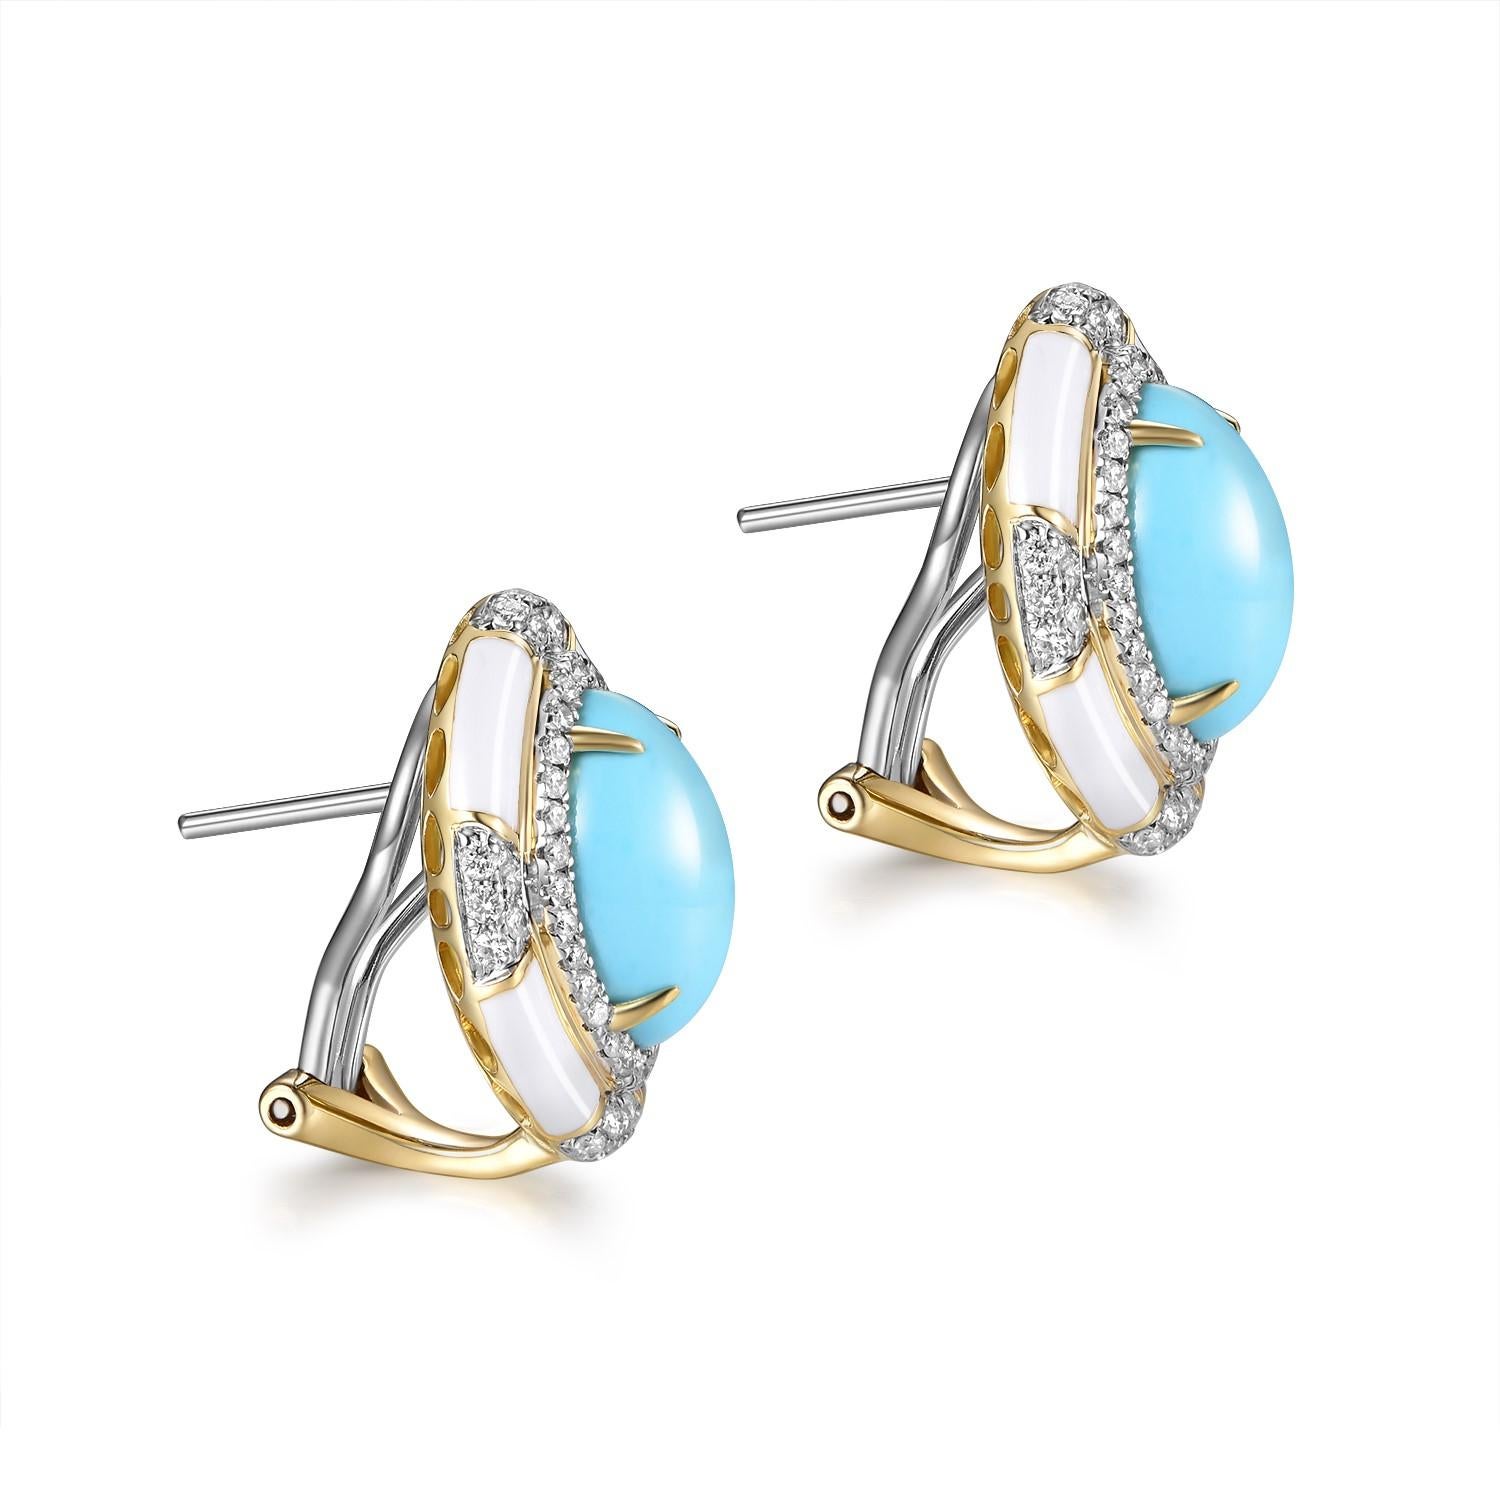 Encased in the purest 18K gold, these exquisite earrings present a captivating interplay of color and light, each featuring an oval turquoise centerpiece of 4.24 carats. The turquoise, with its serene blue hue reminiscent of a clear sky, is